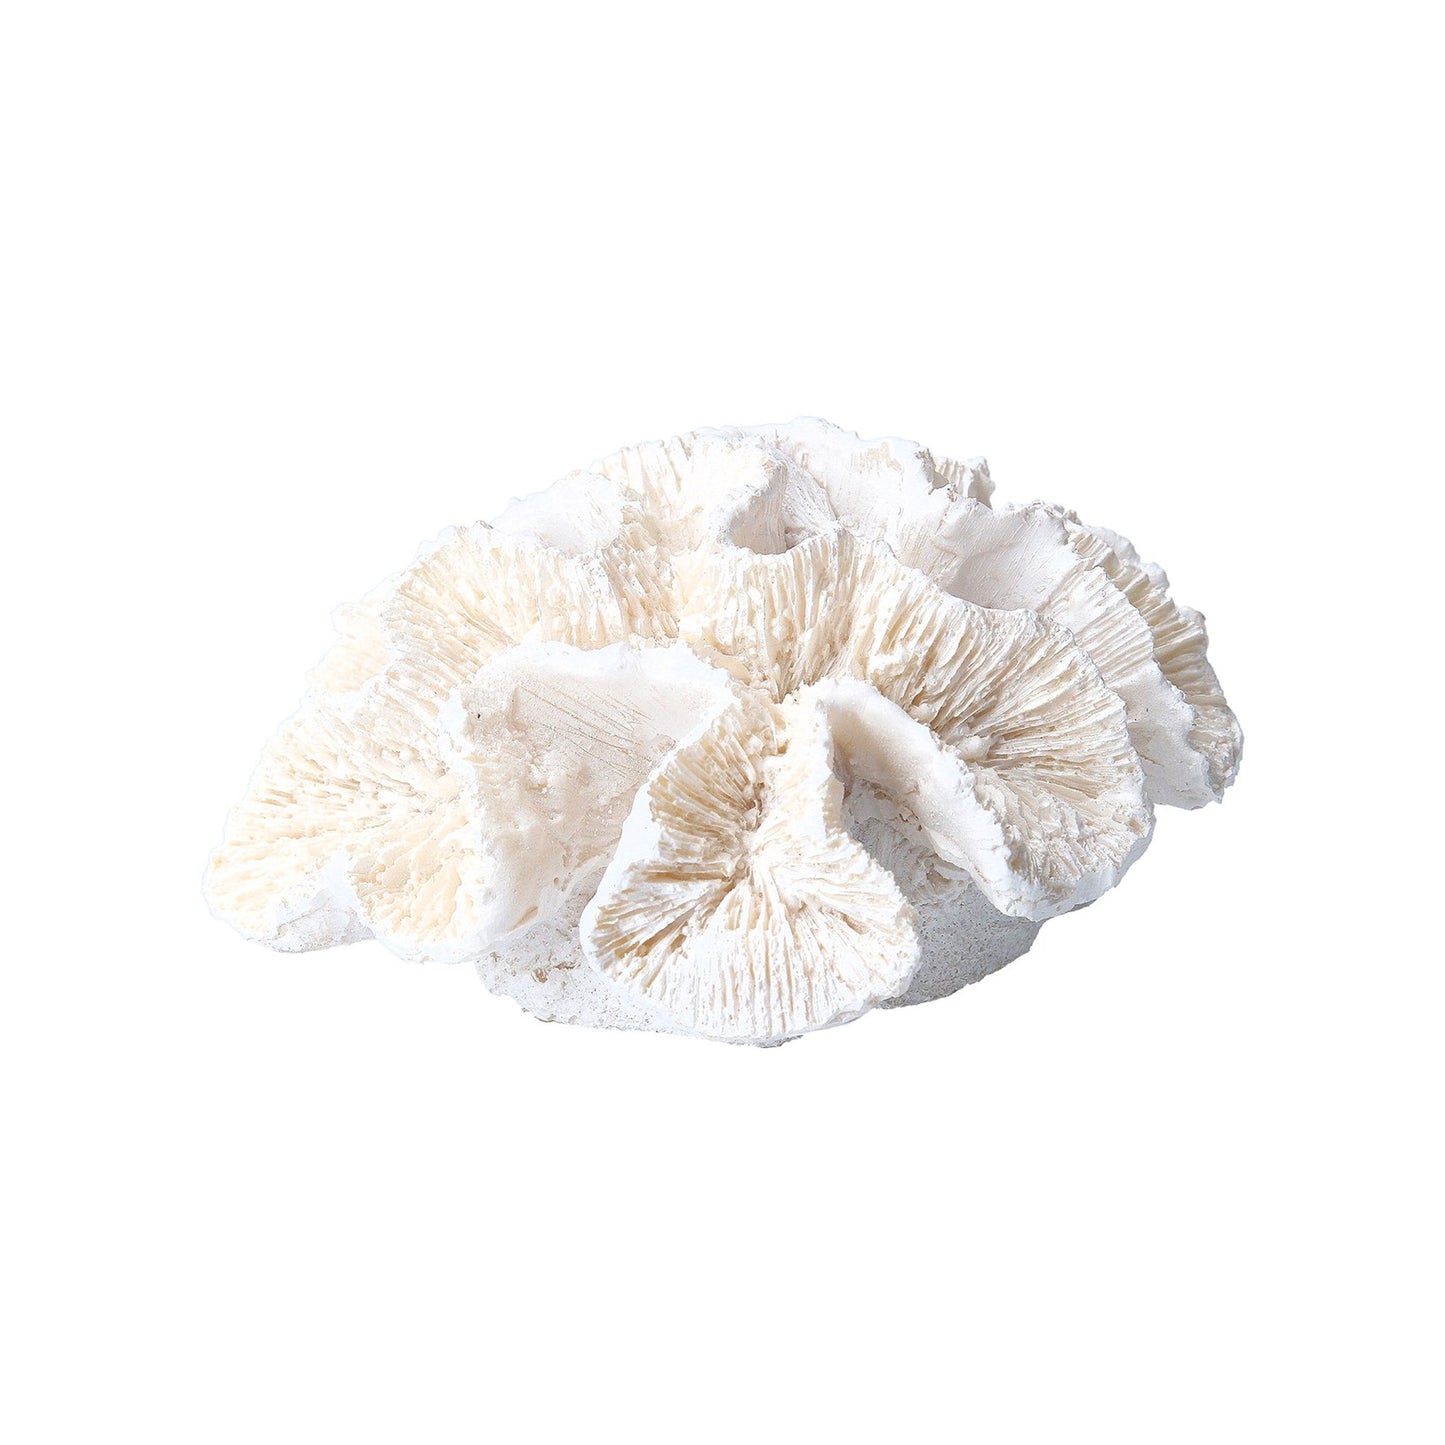 Small Coral Sculpture